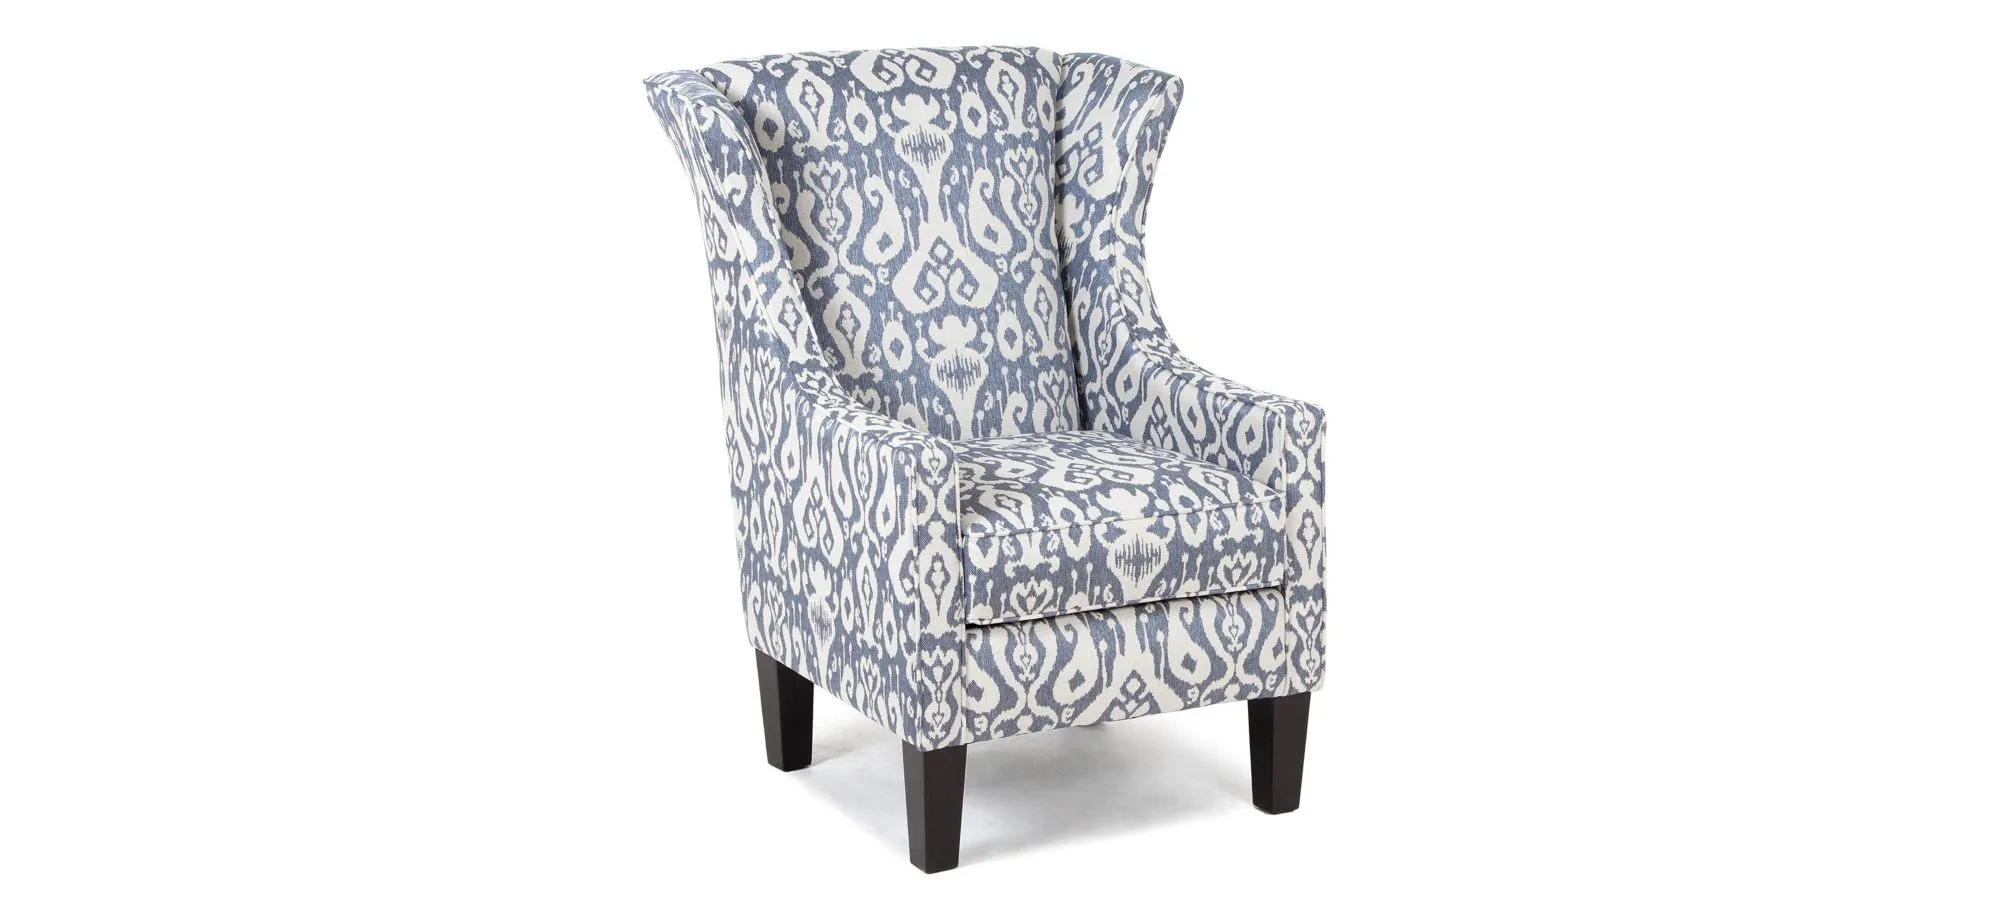 Jean Accent Chair in Casbah Denim by Chairs America